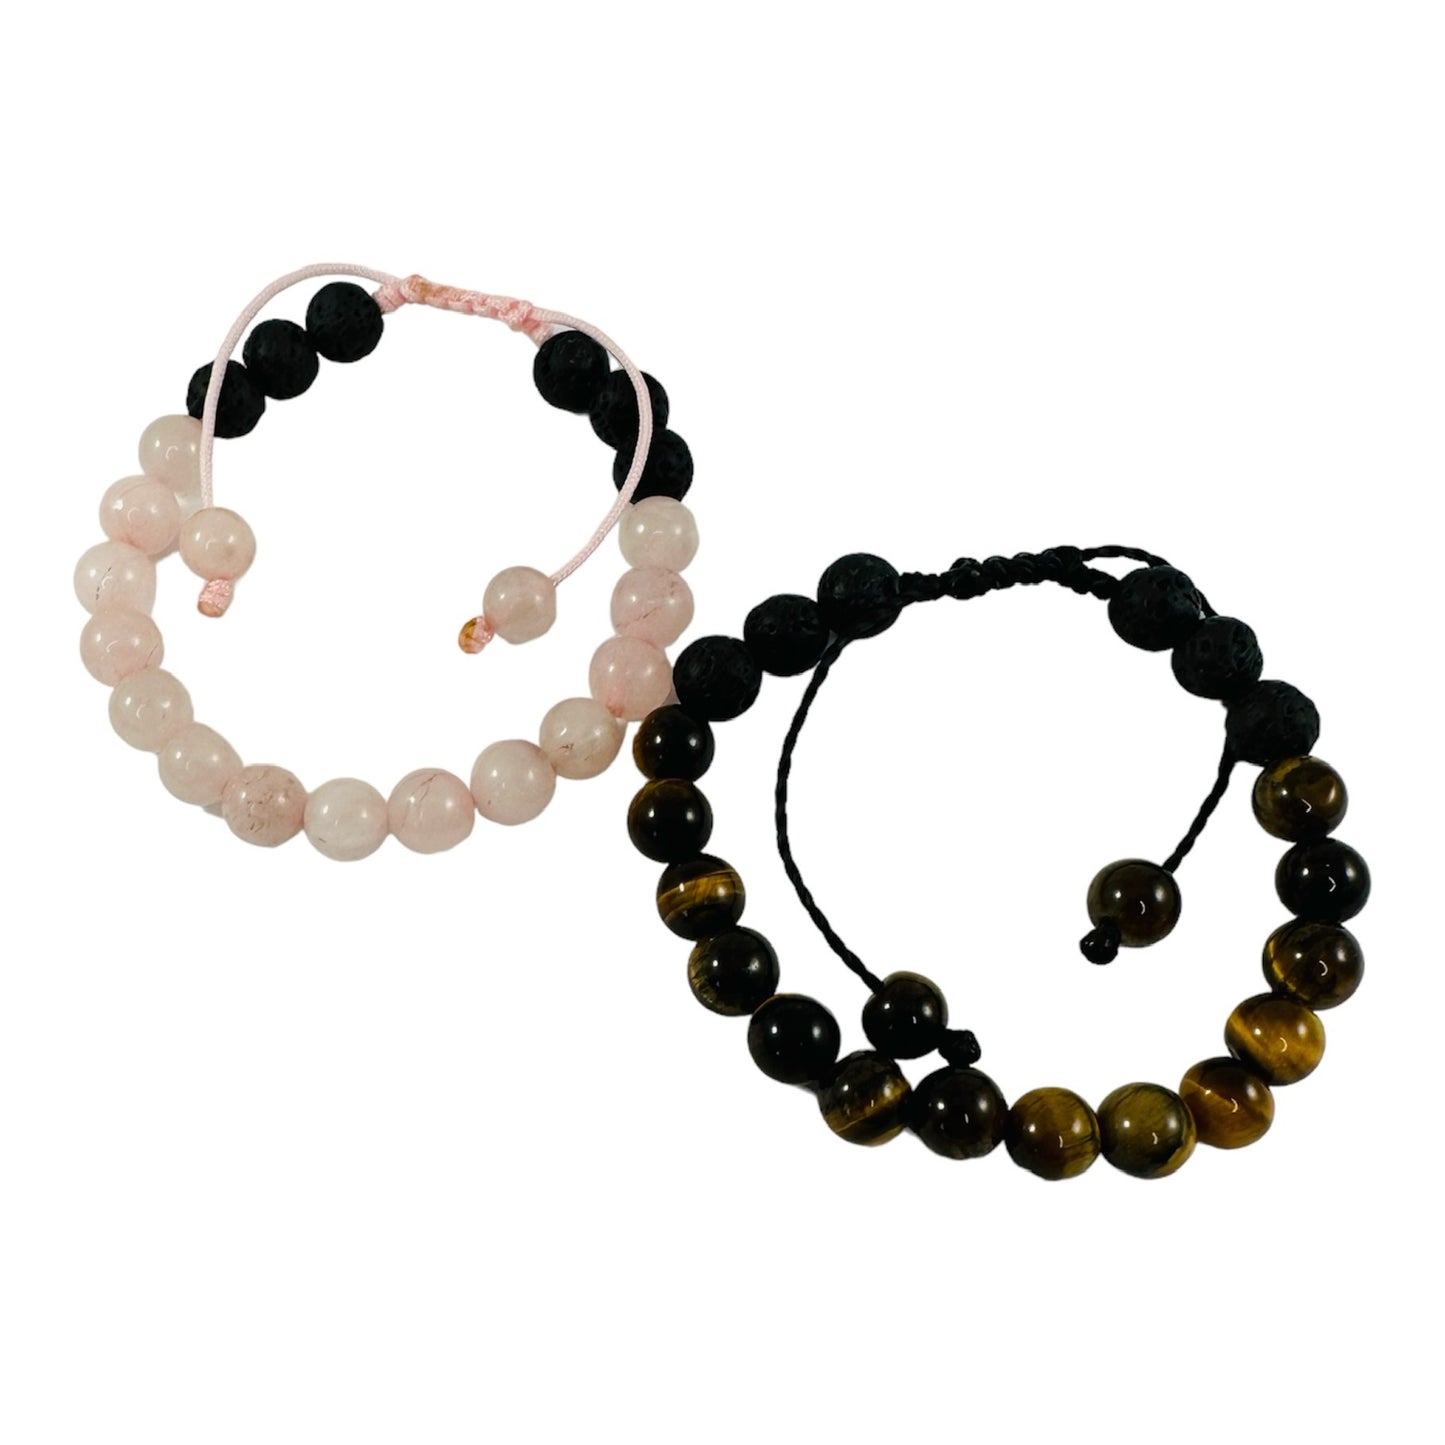 Girls and Boys Aromatherapy Essential Oil Diffuser Lava Rock Bracelet